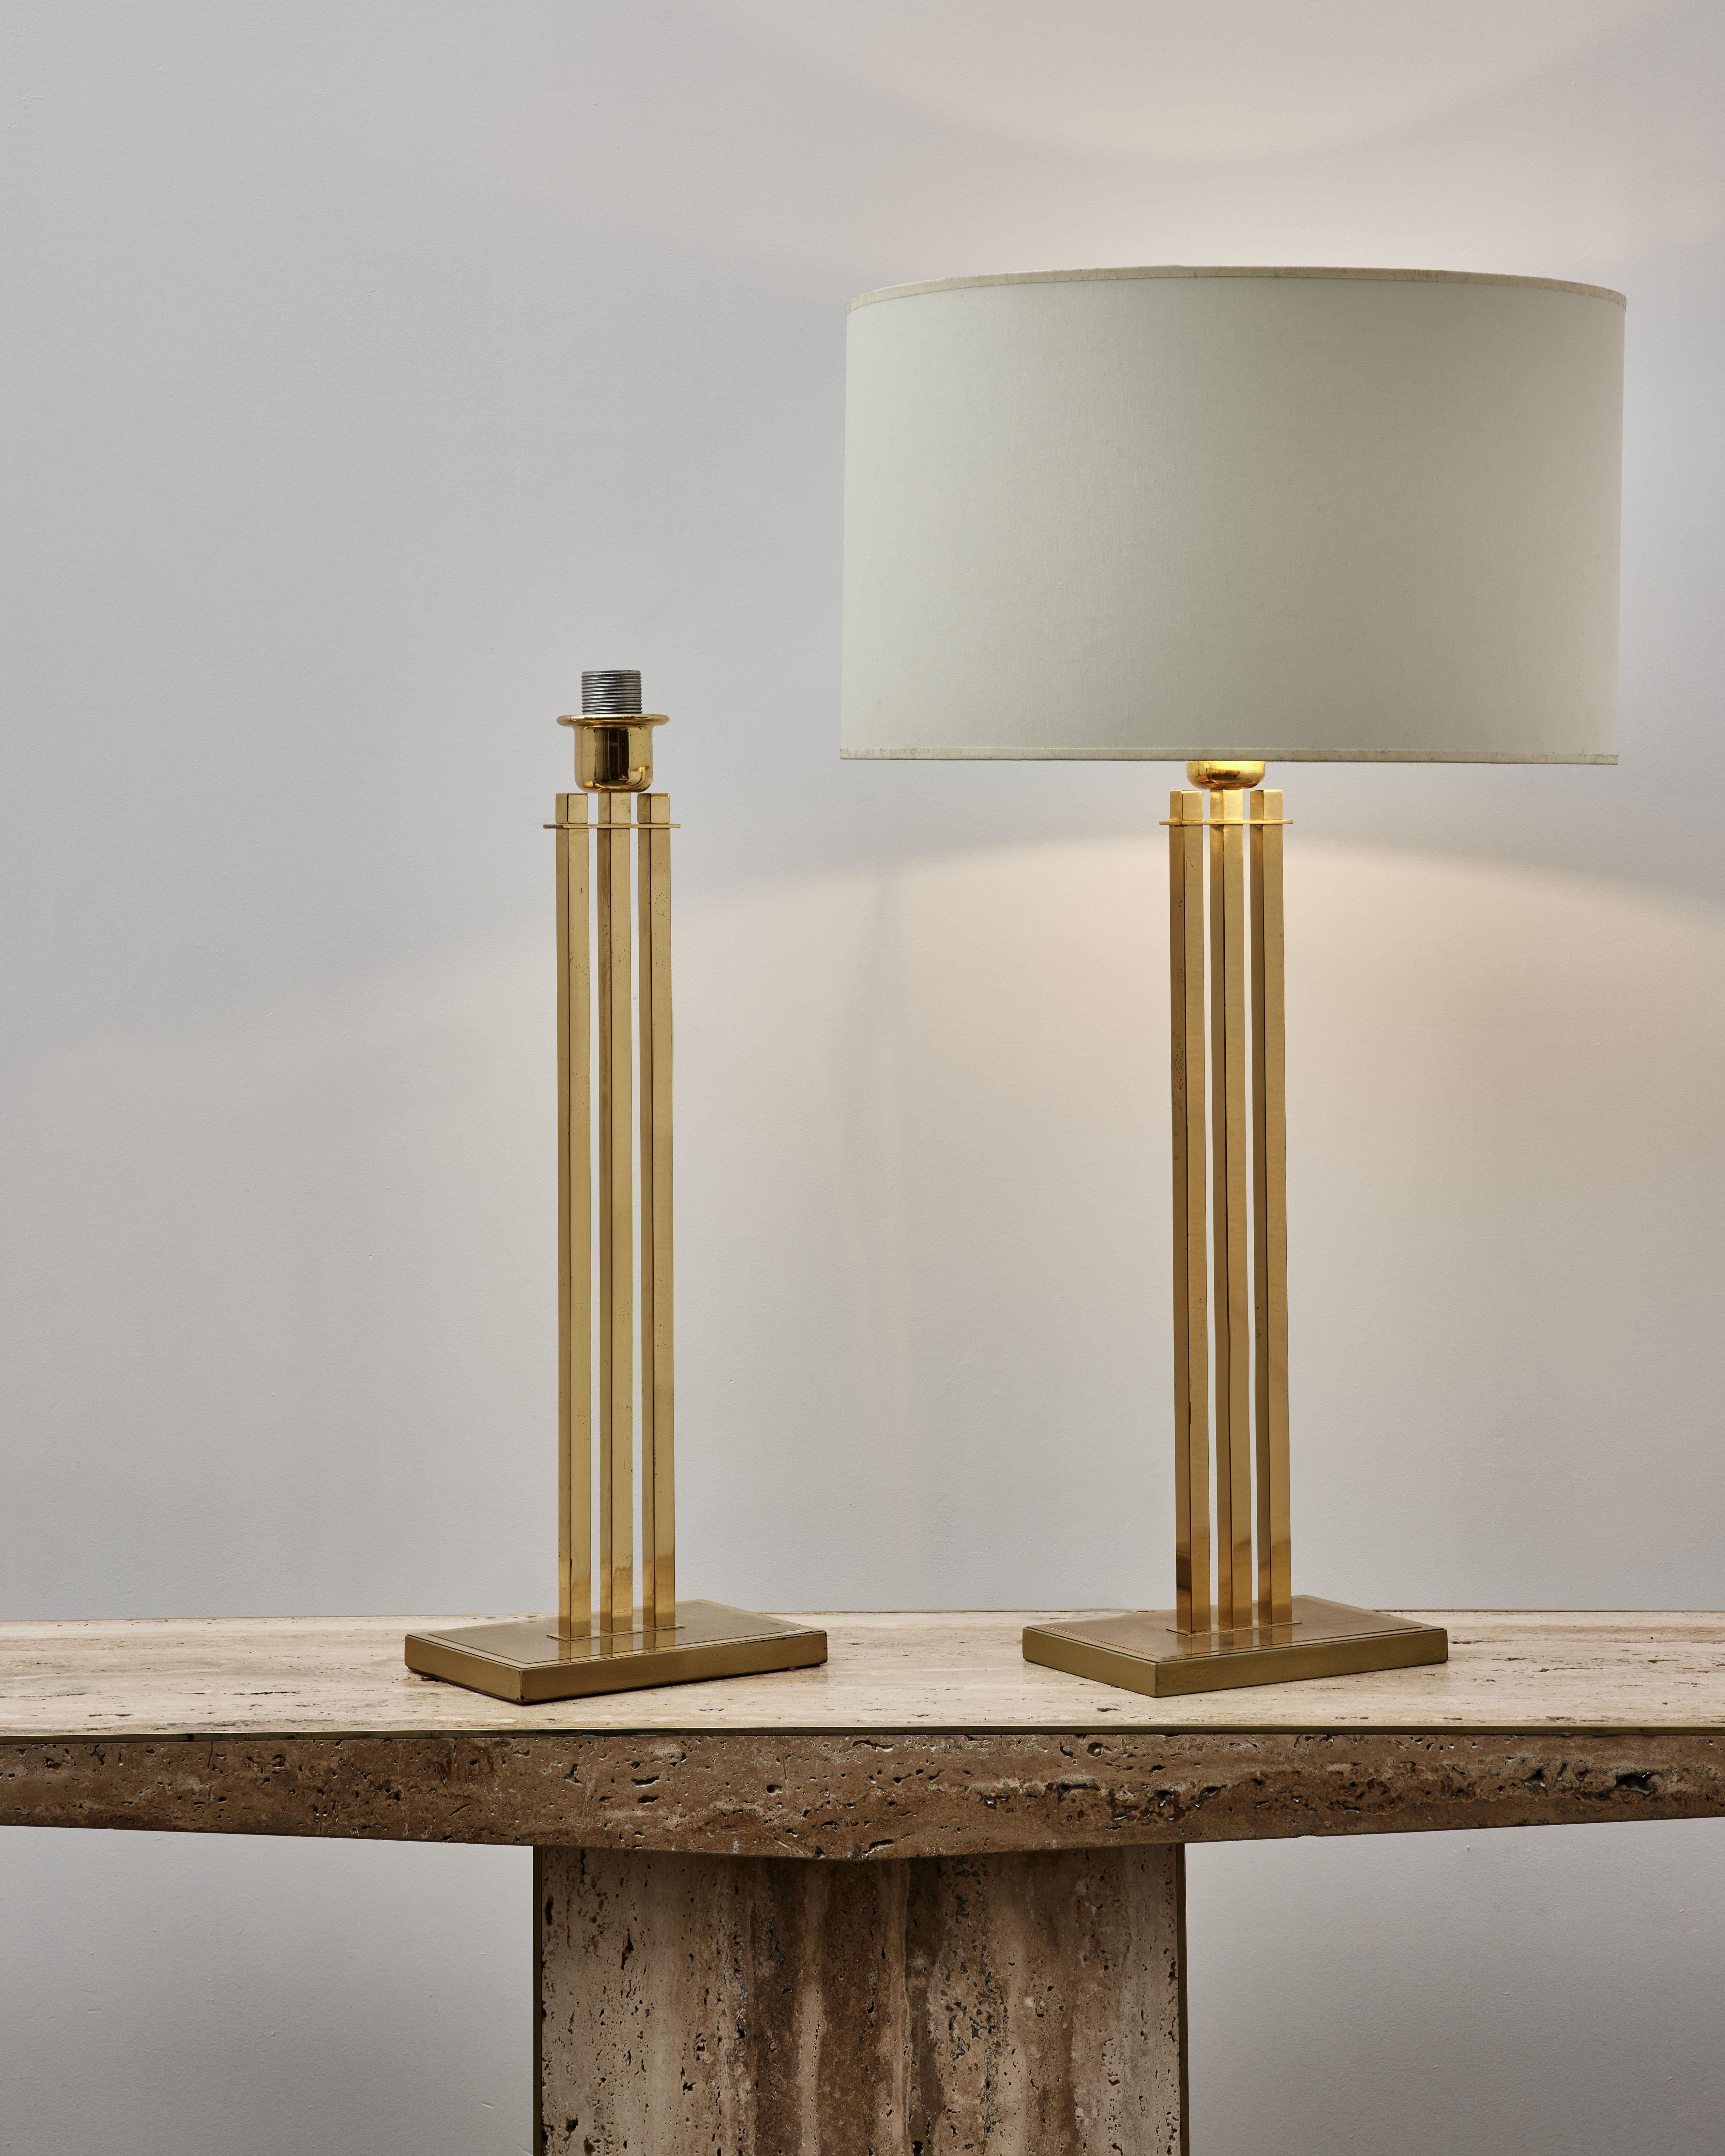 Pair of table lamps in brass.
Creation by Studio Glustin.

Dimensions: 23 x 15 x H 65 cm
(Price and dimensions without shades)